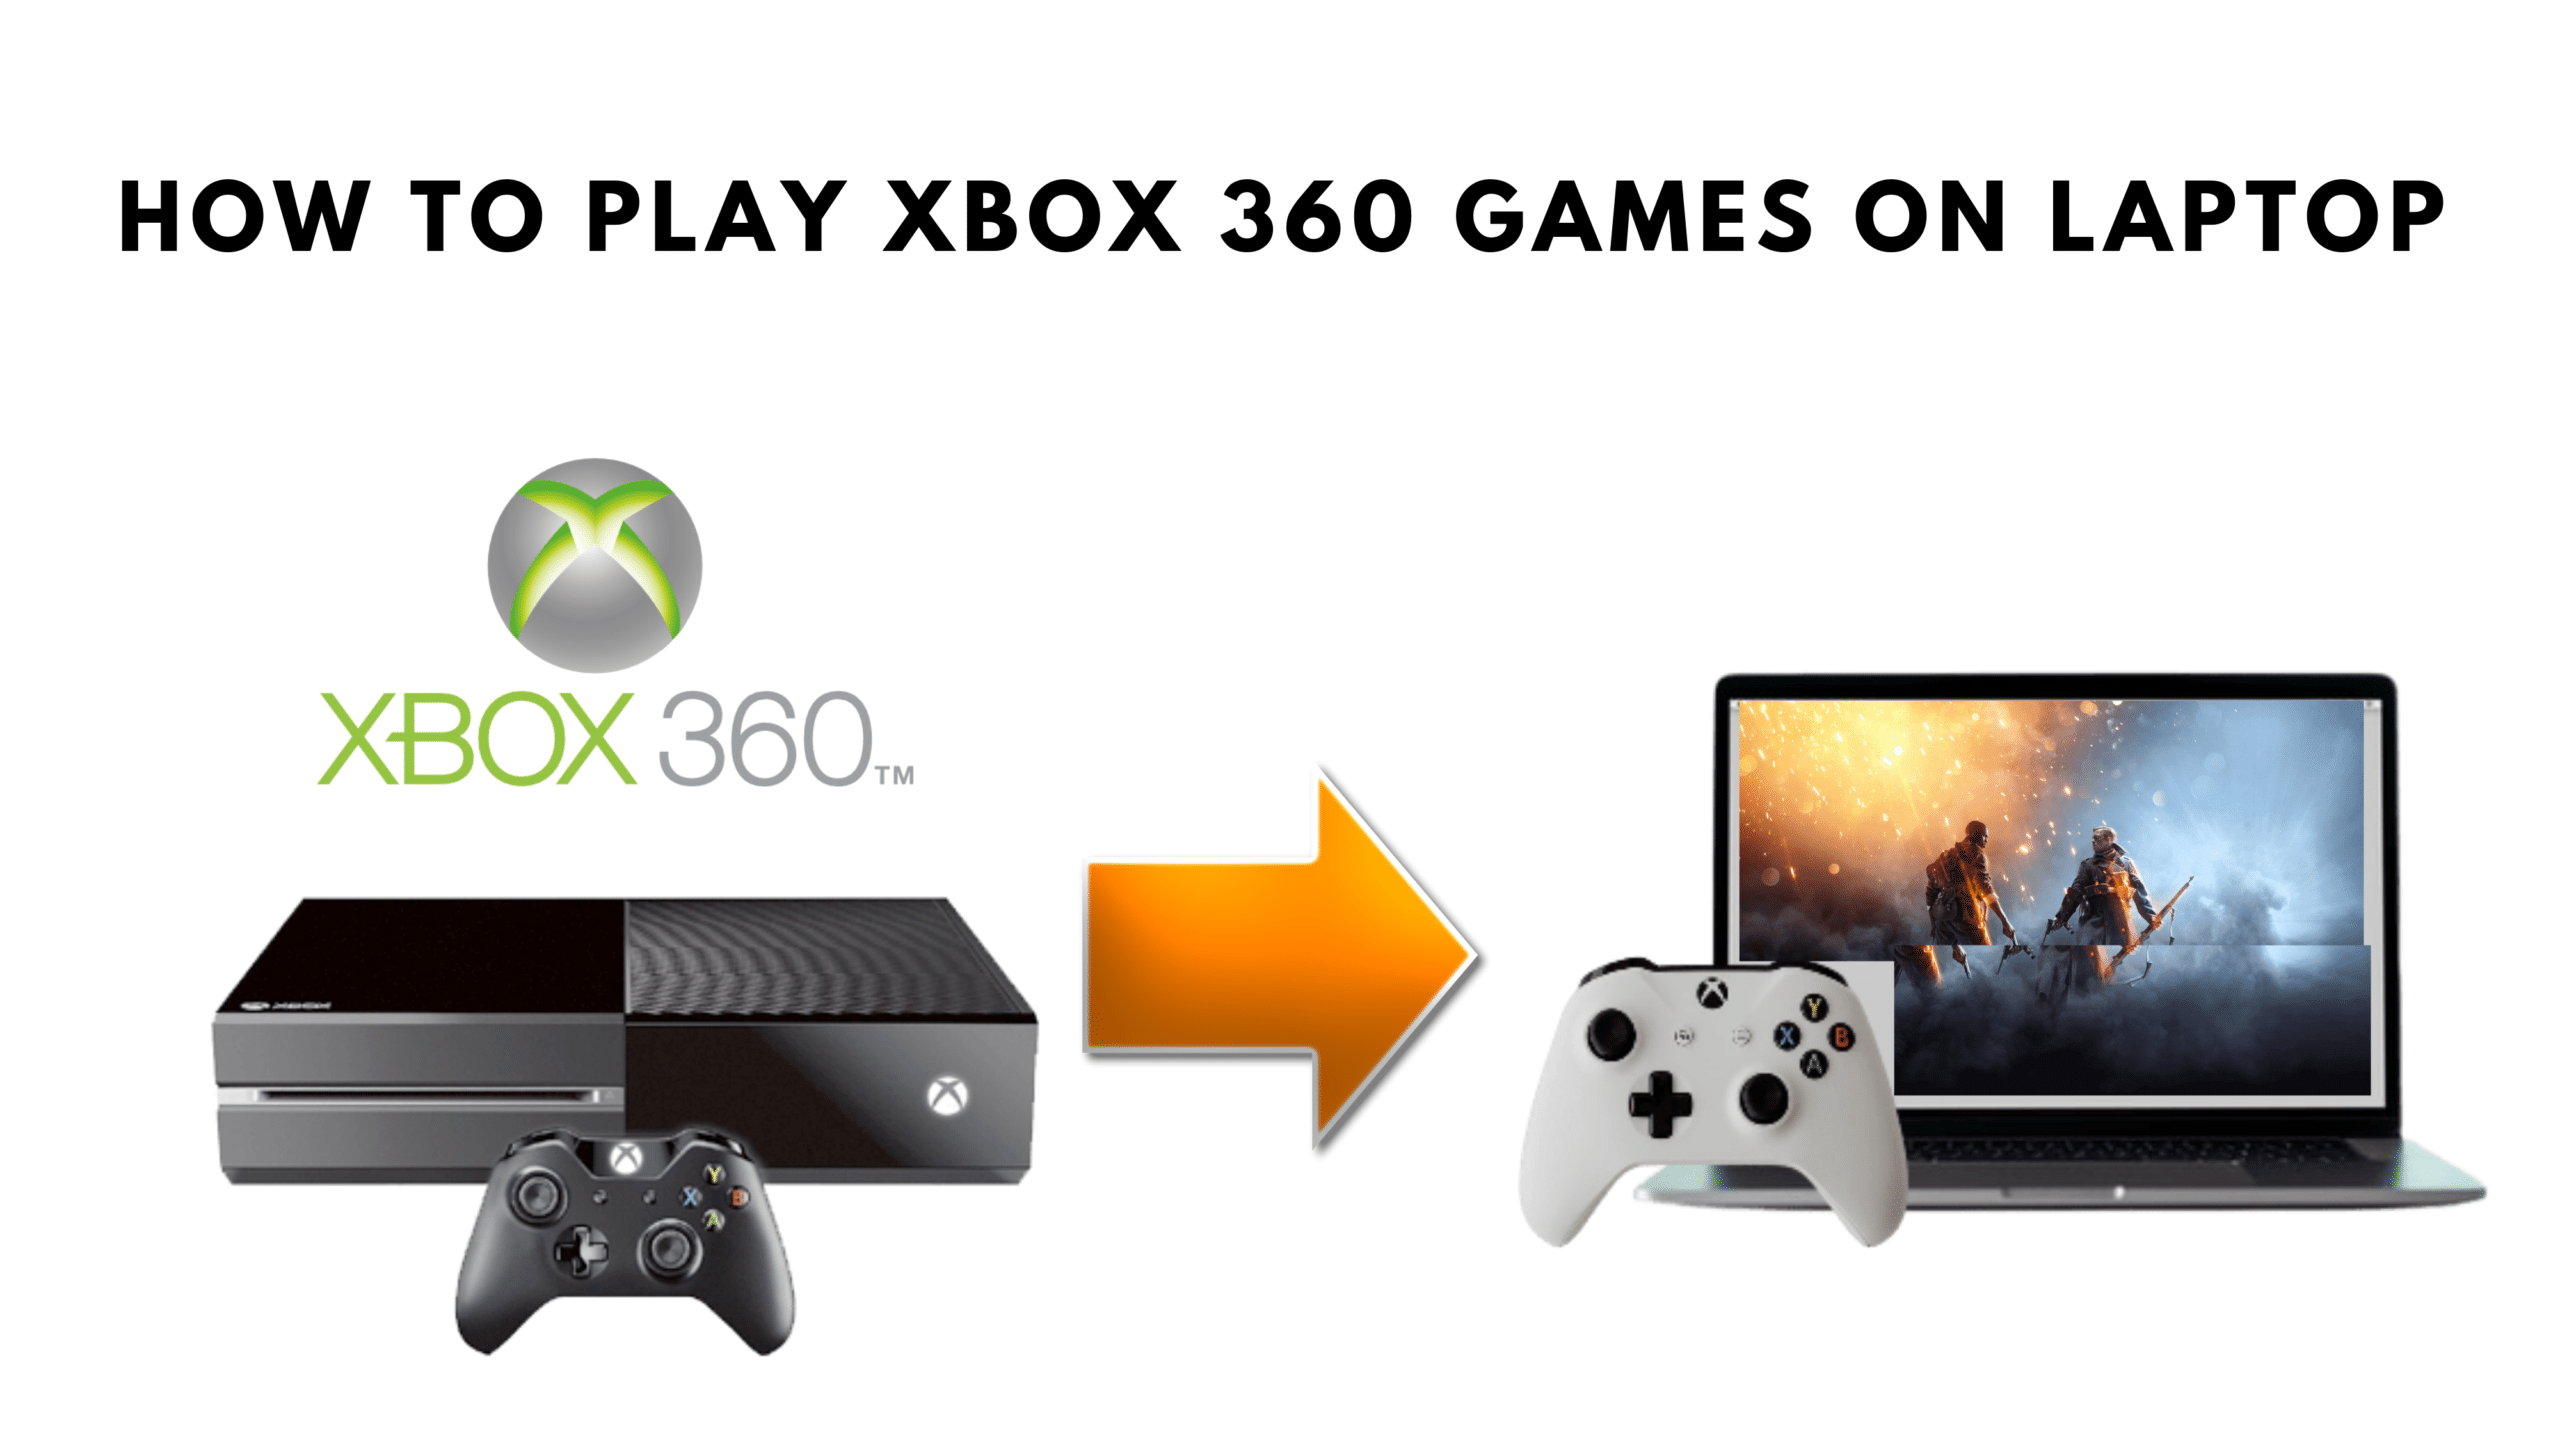 How to play Xbox 360 games on laptop